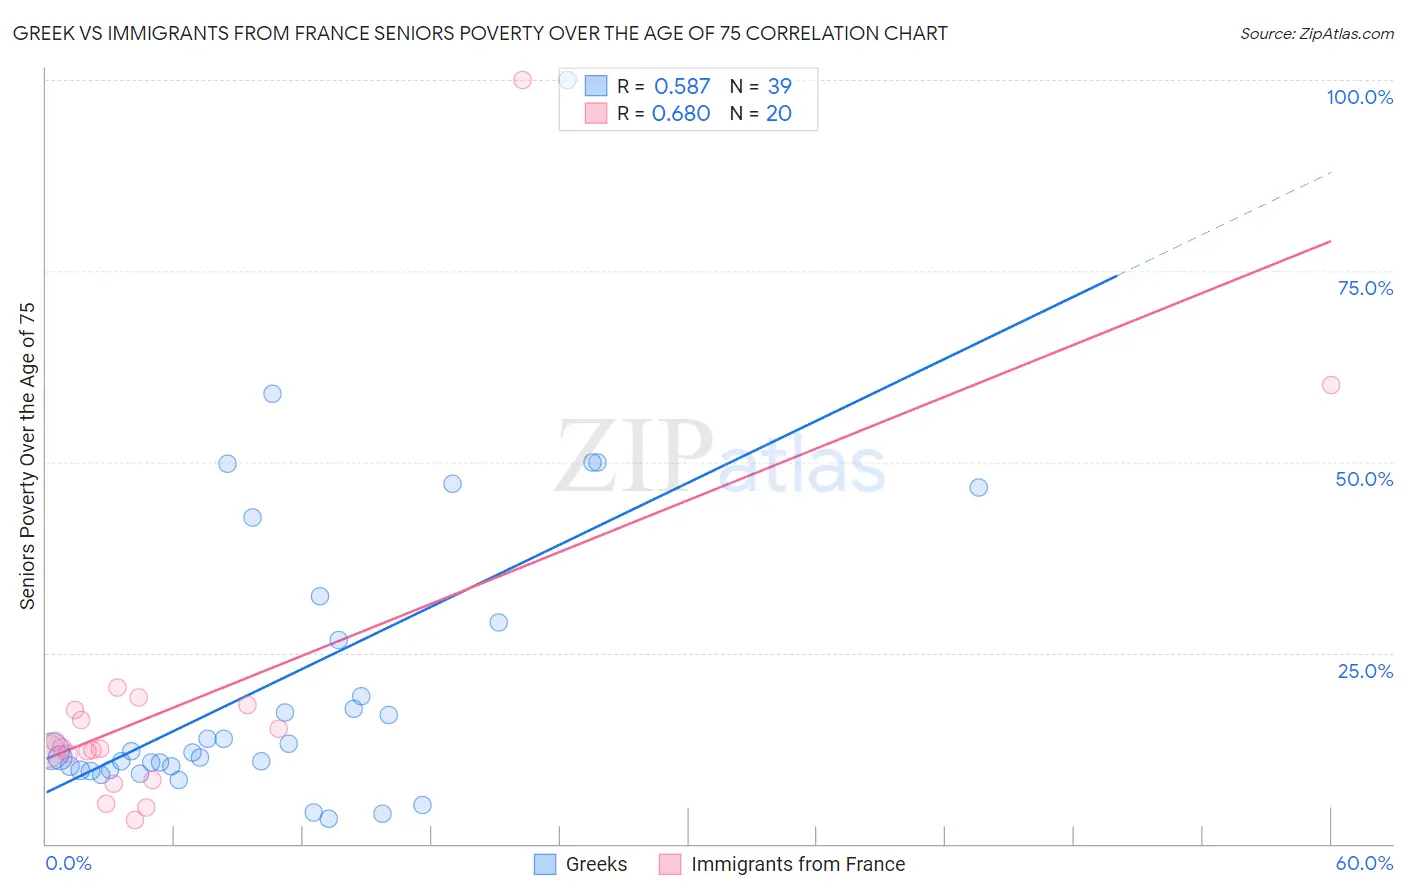 Greek vs Immigrants from France Seniors Poverty Over the Age of 75